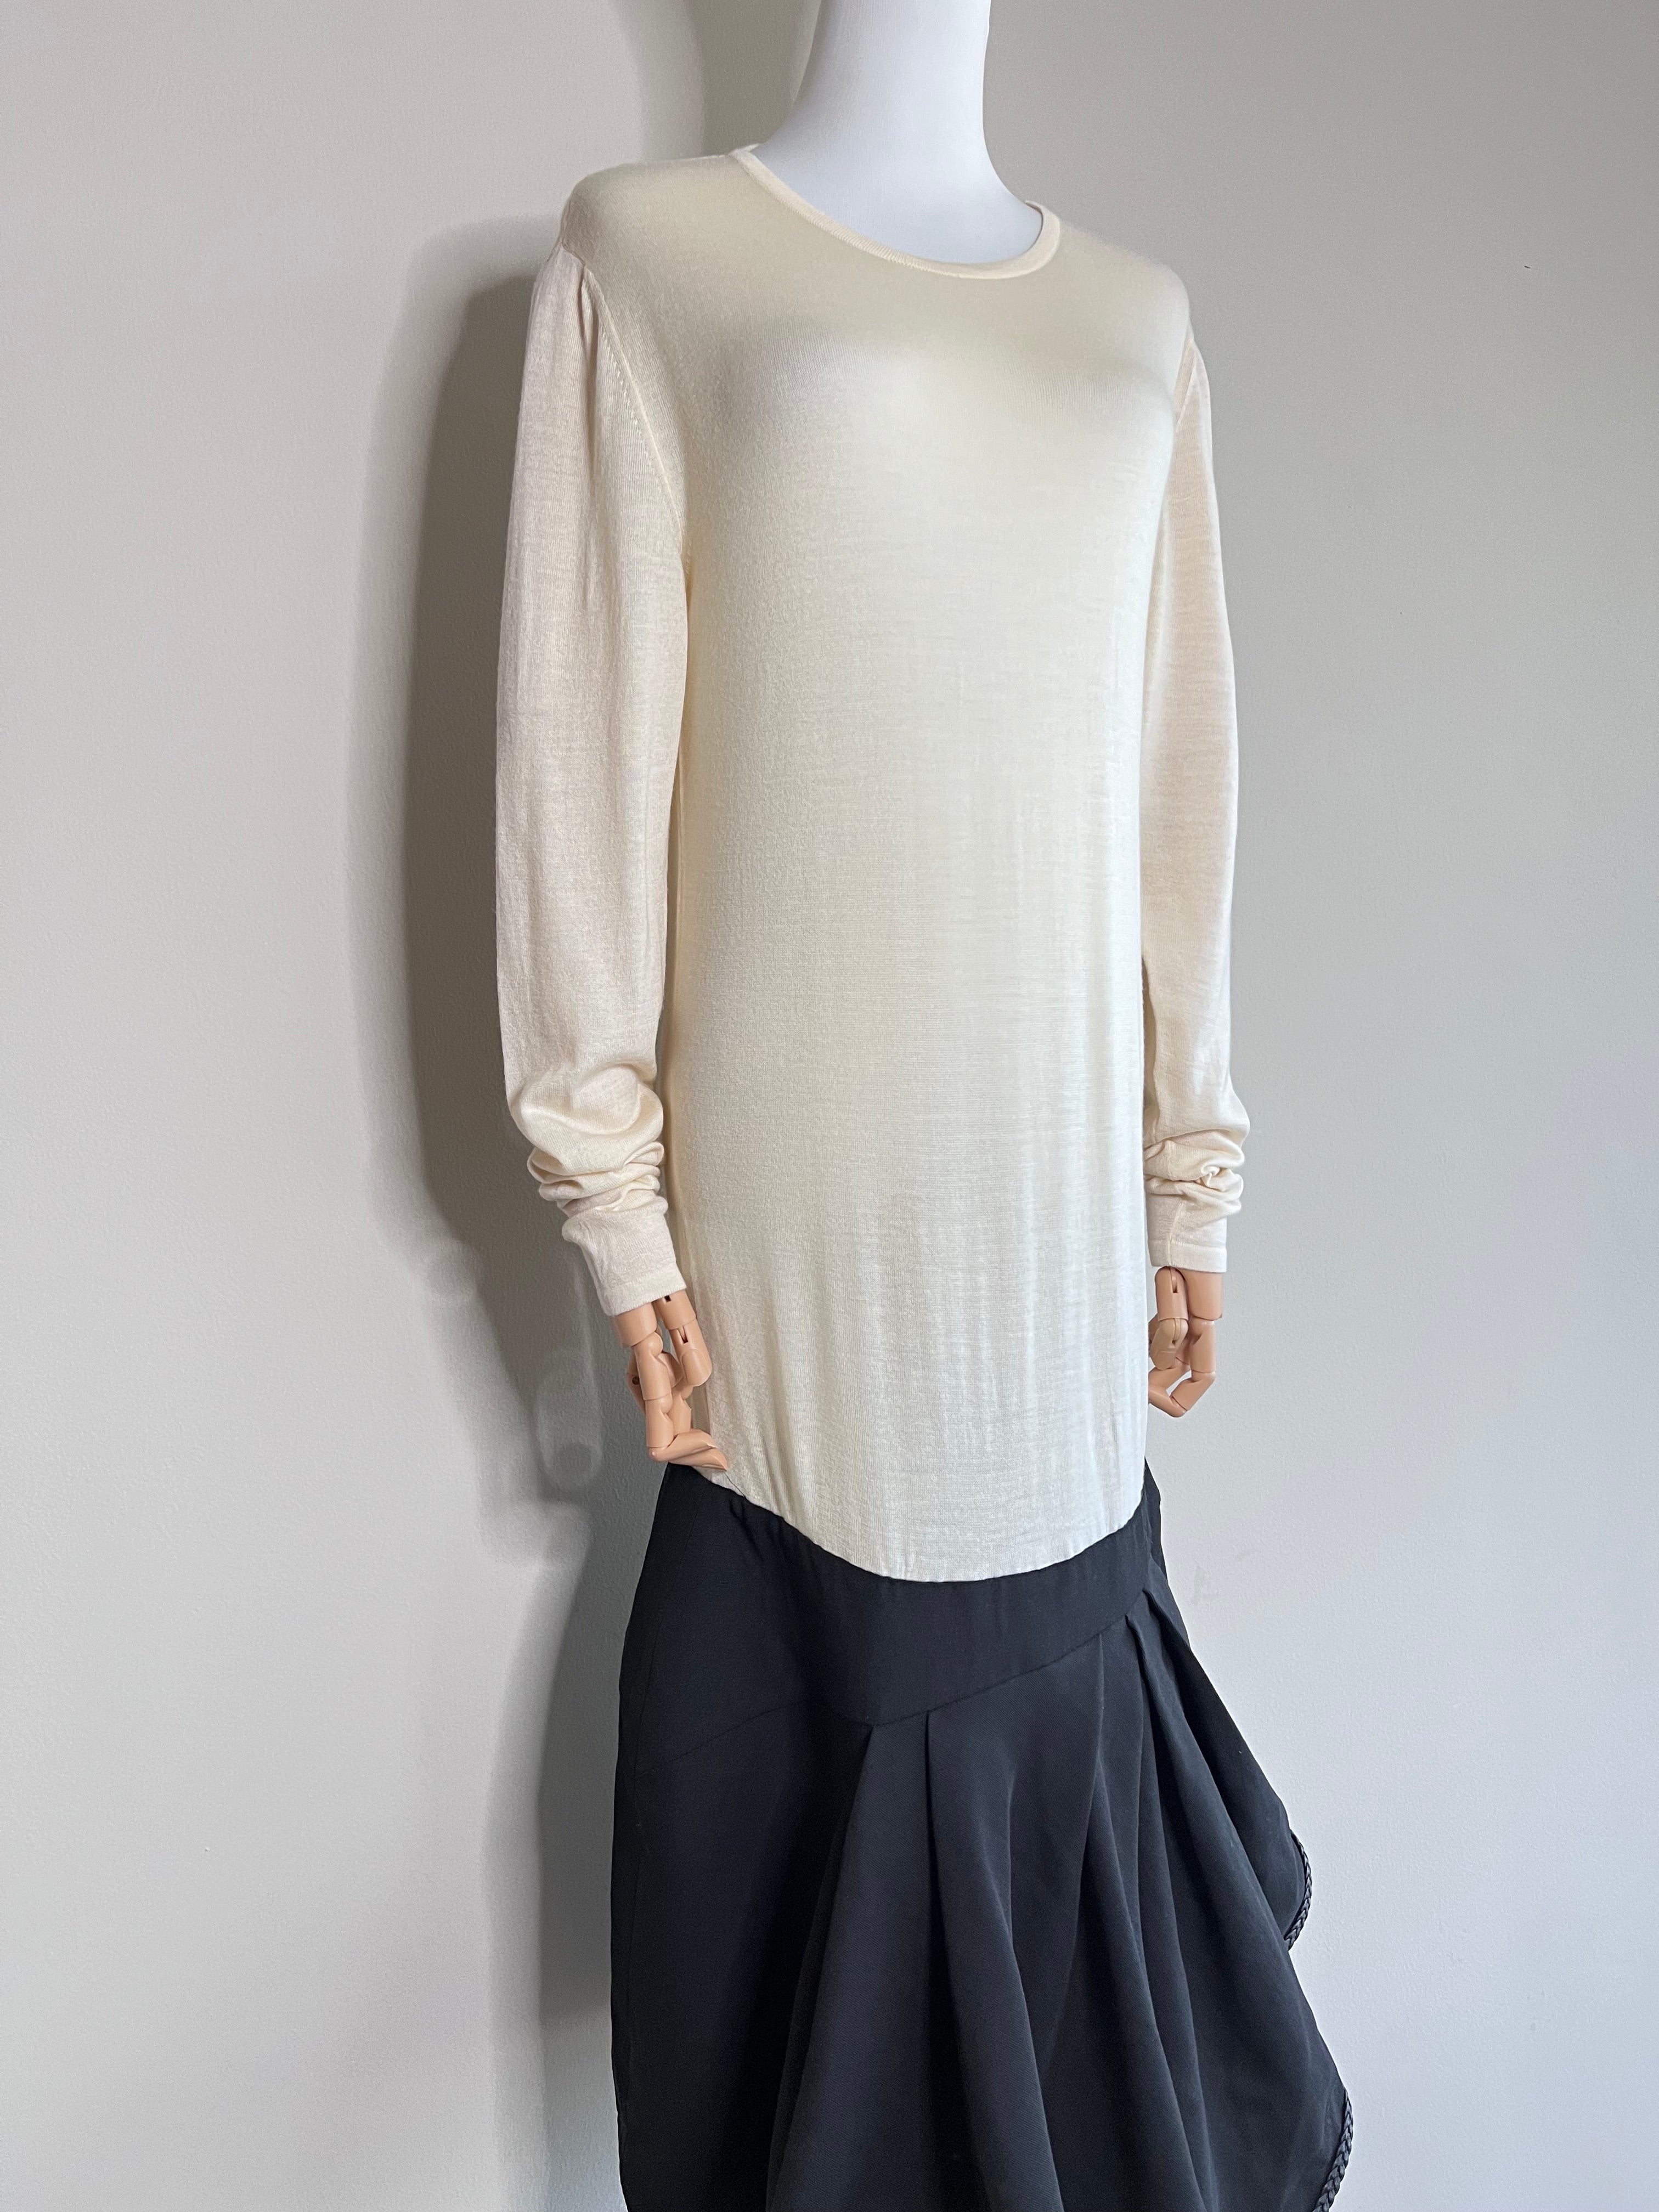 Off white long sleeve with black pleated bottom dress - JAY AHR